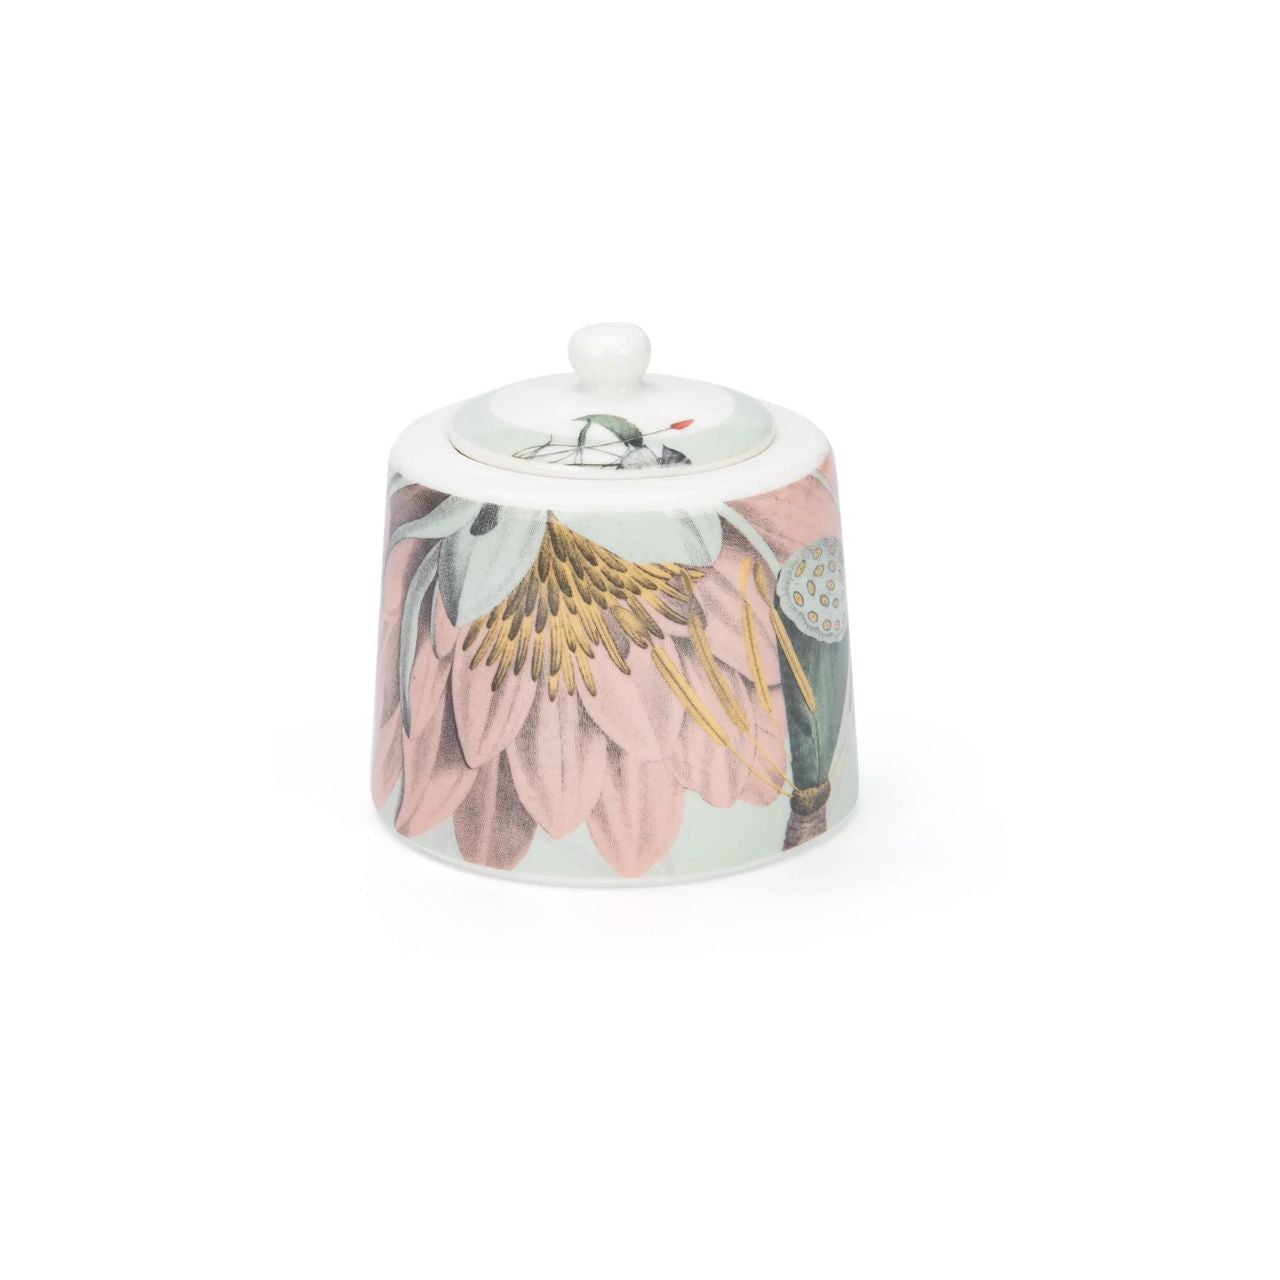 Natures Bloom Sugar Bowl, Creamer and Serving Tray Set  A beautiful set depicting gorgeous flowers in pink, blue and green.  - Ideal house warming gift, new home, birthday or general occasion. - Part Of Our Nature Bloom Collection